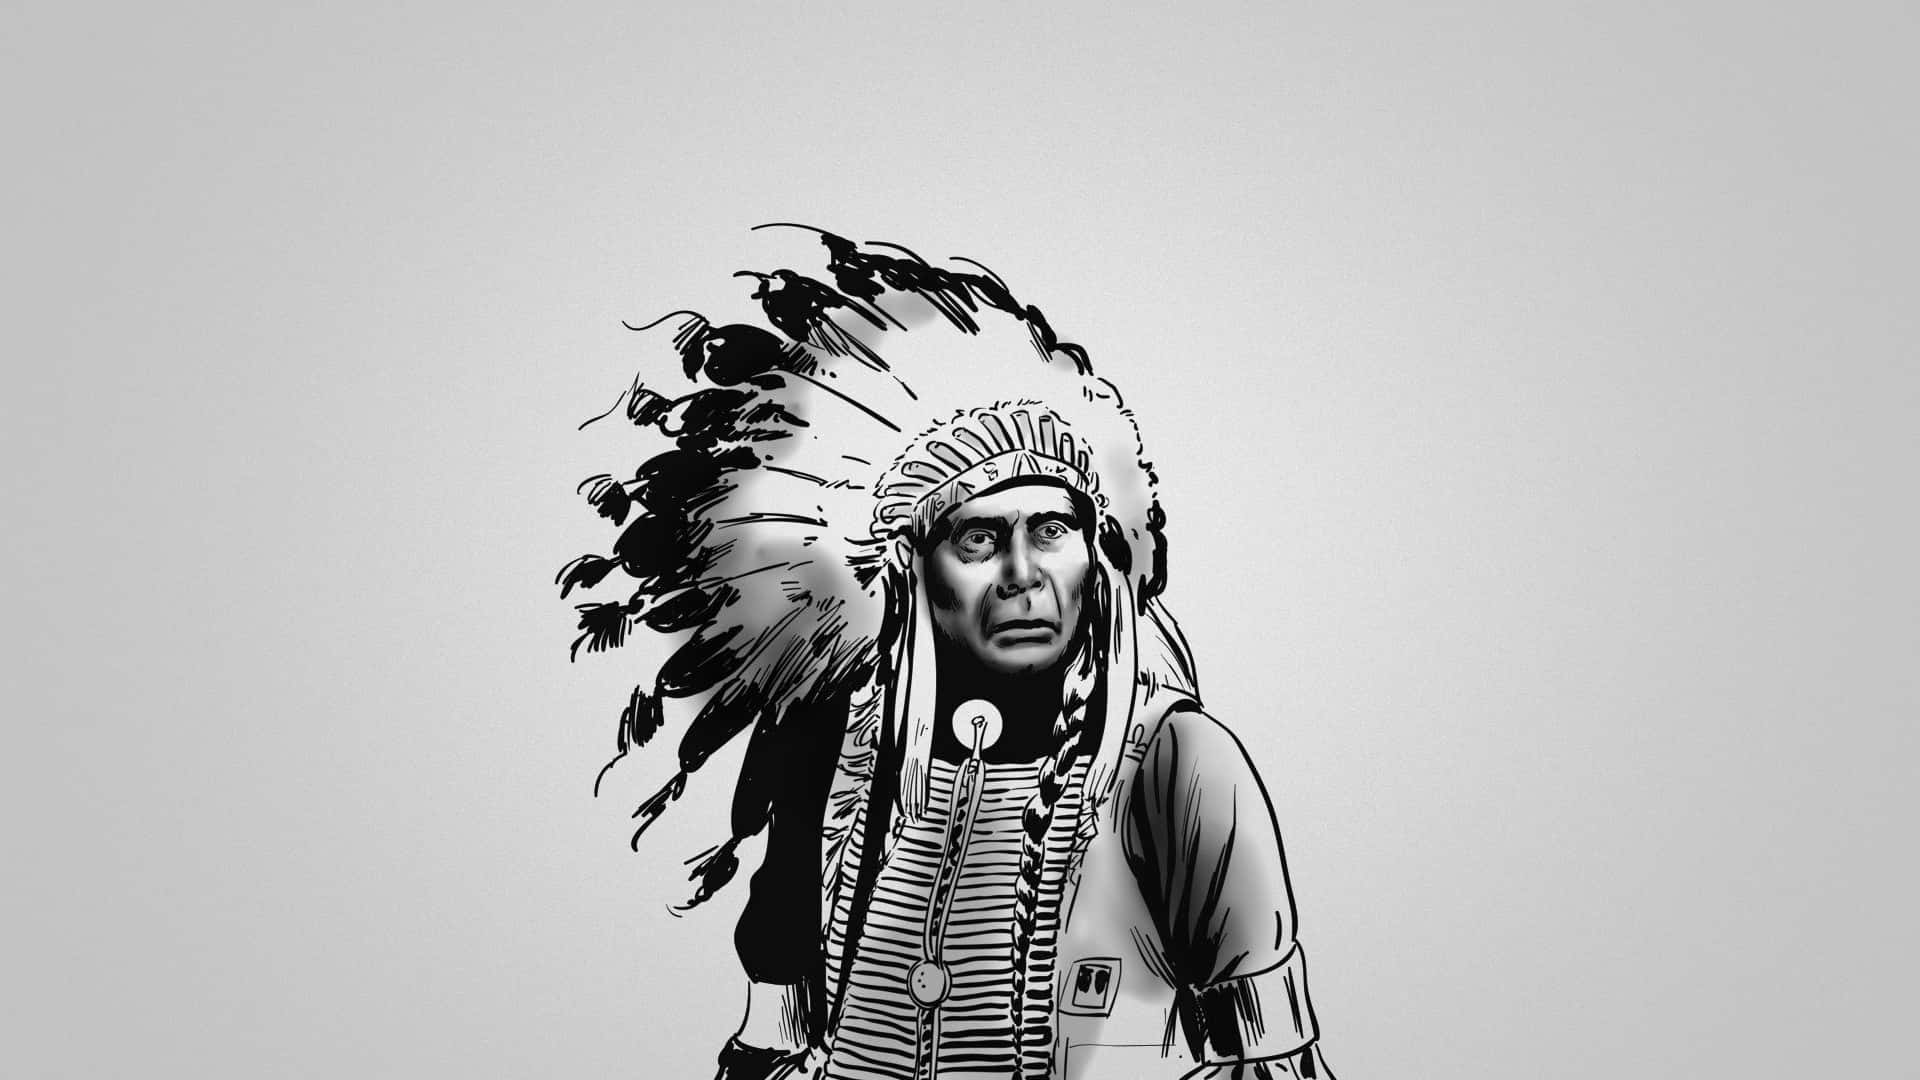 A proud, proud Native American Indian in traditional attire. Wallpaper